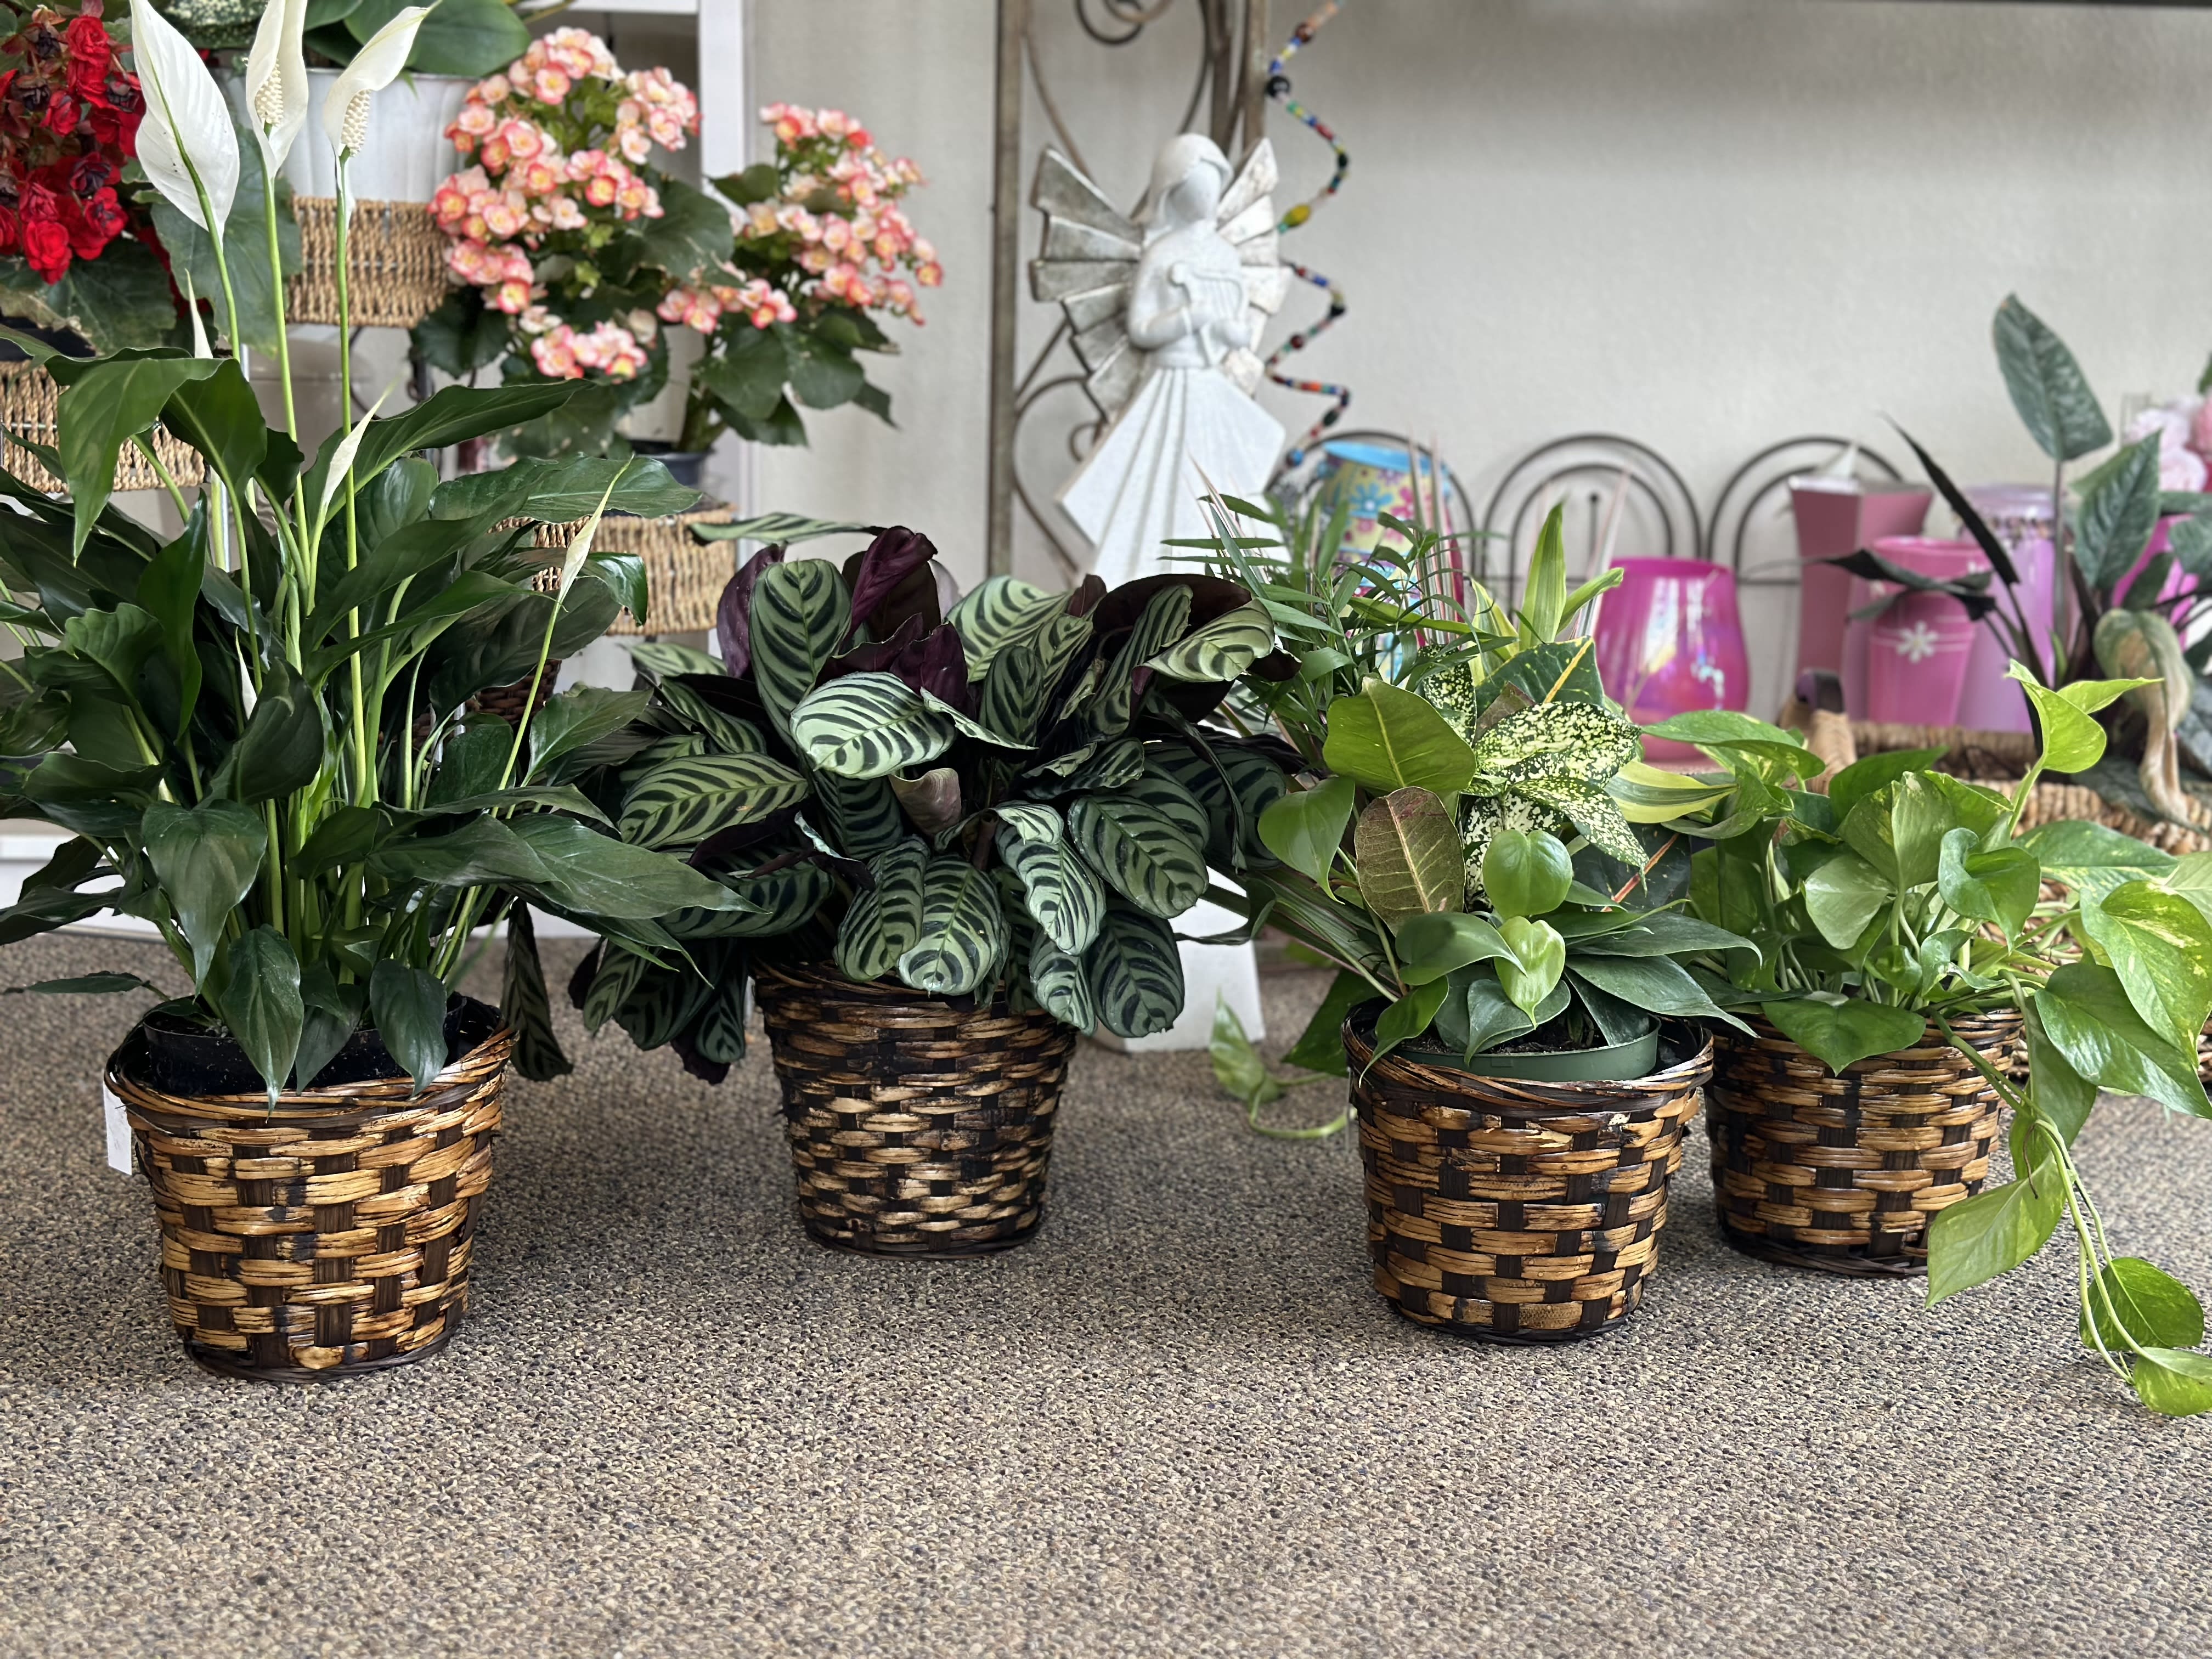 Designer's Choice Green Plant  - A lush green plant in a 6 inch wicker basket or upgraded pot. Your florist will choose a green plant from our selection of plants we get every week!